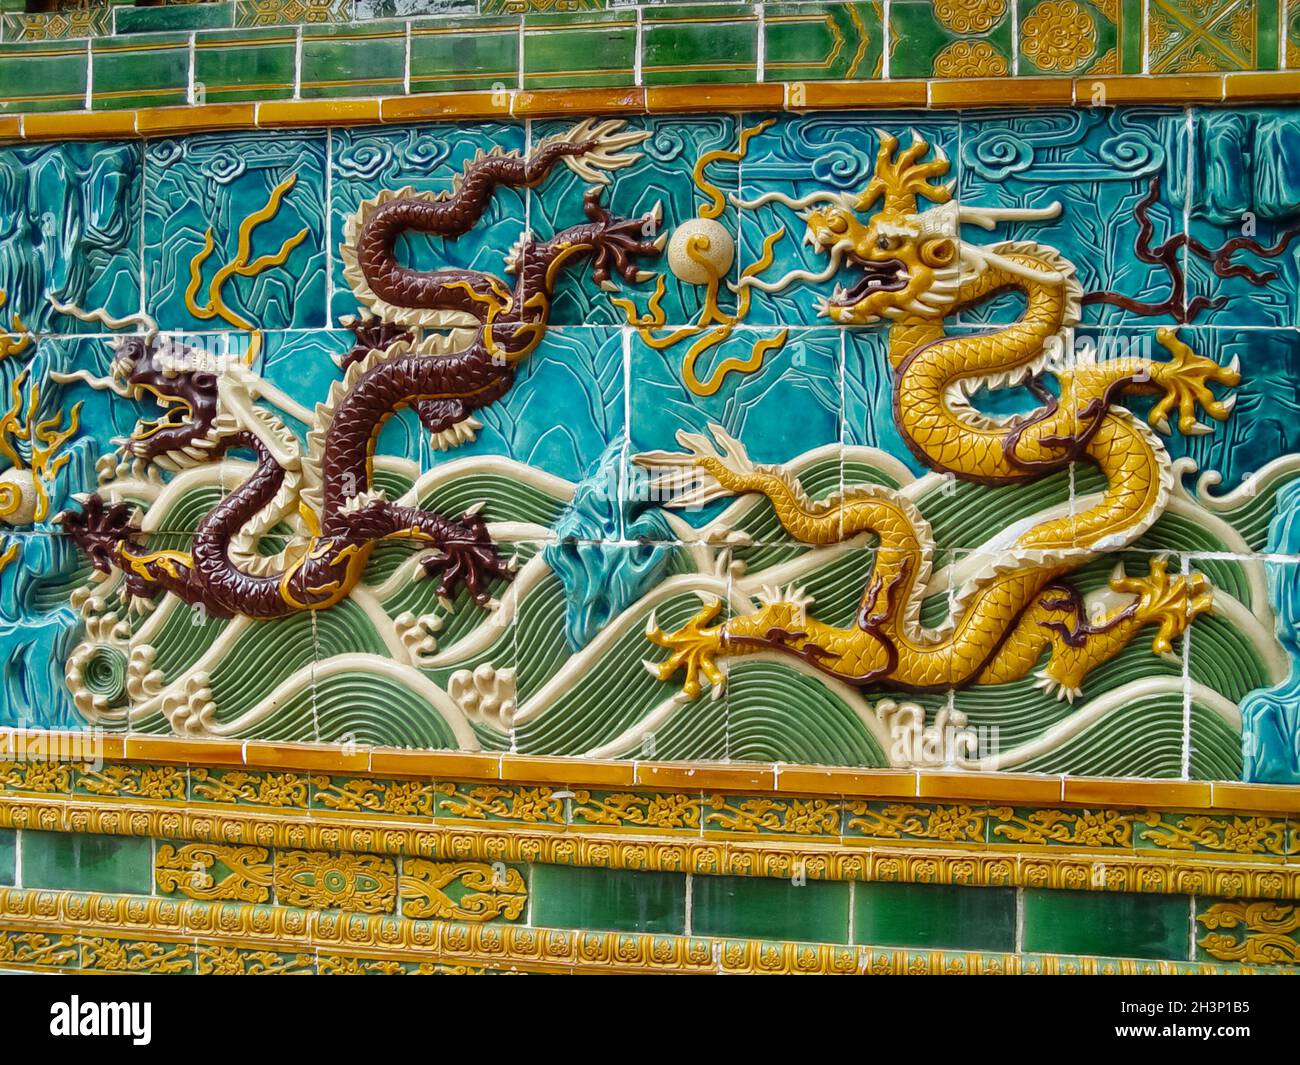 Mosaic of dragons on Chinese sarcophagus. Decorations made of tiles. Stock Photo